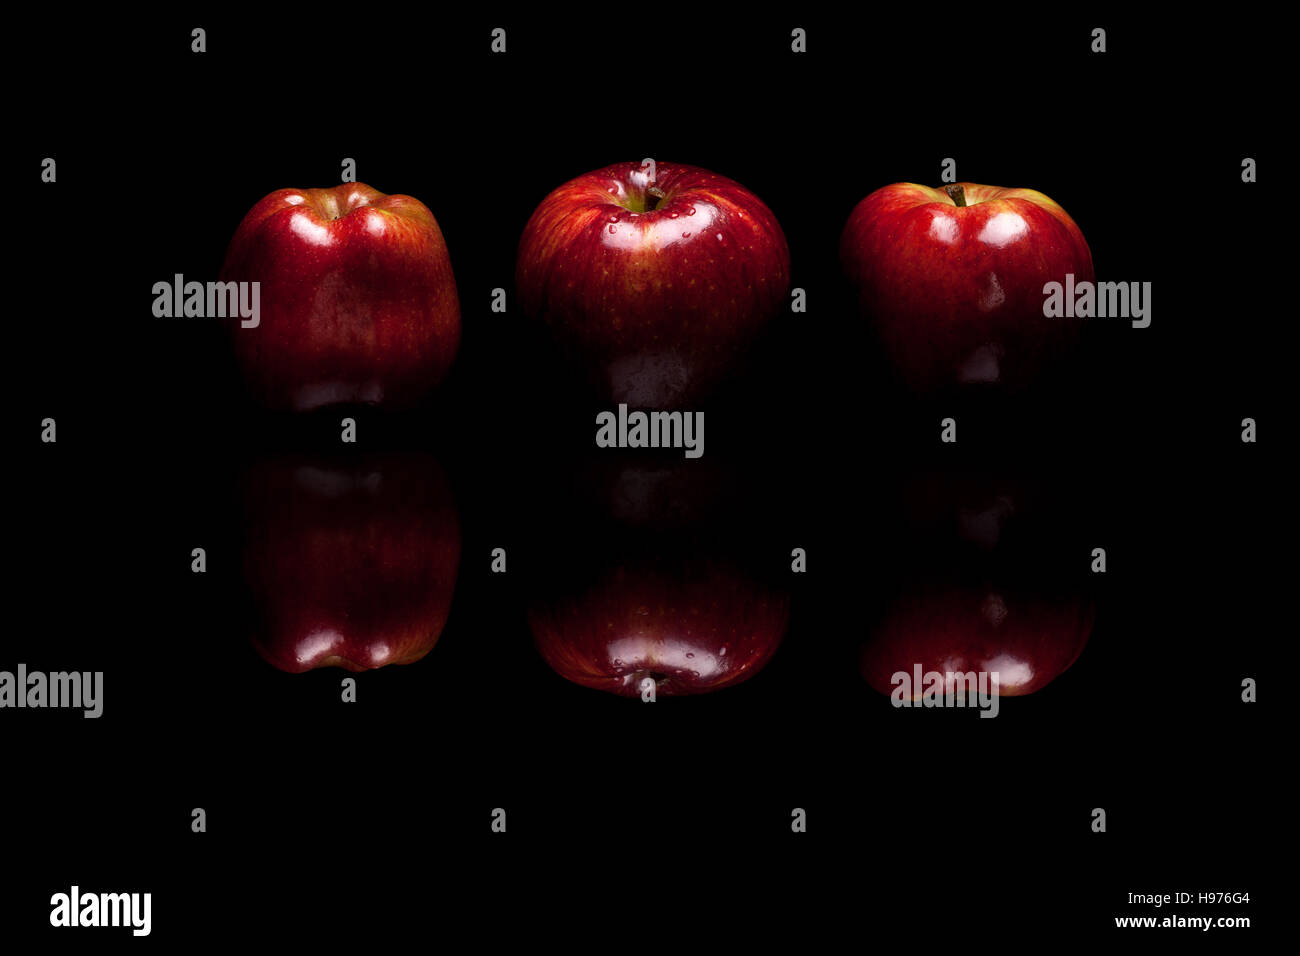 Three red apples isolated on black reflective background Stock Photo